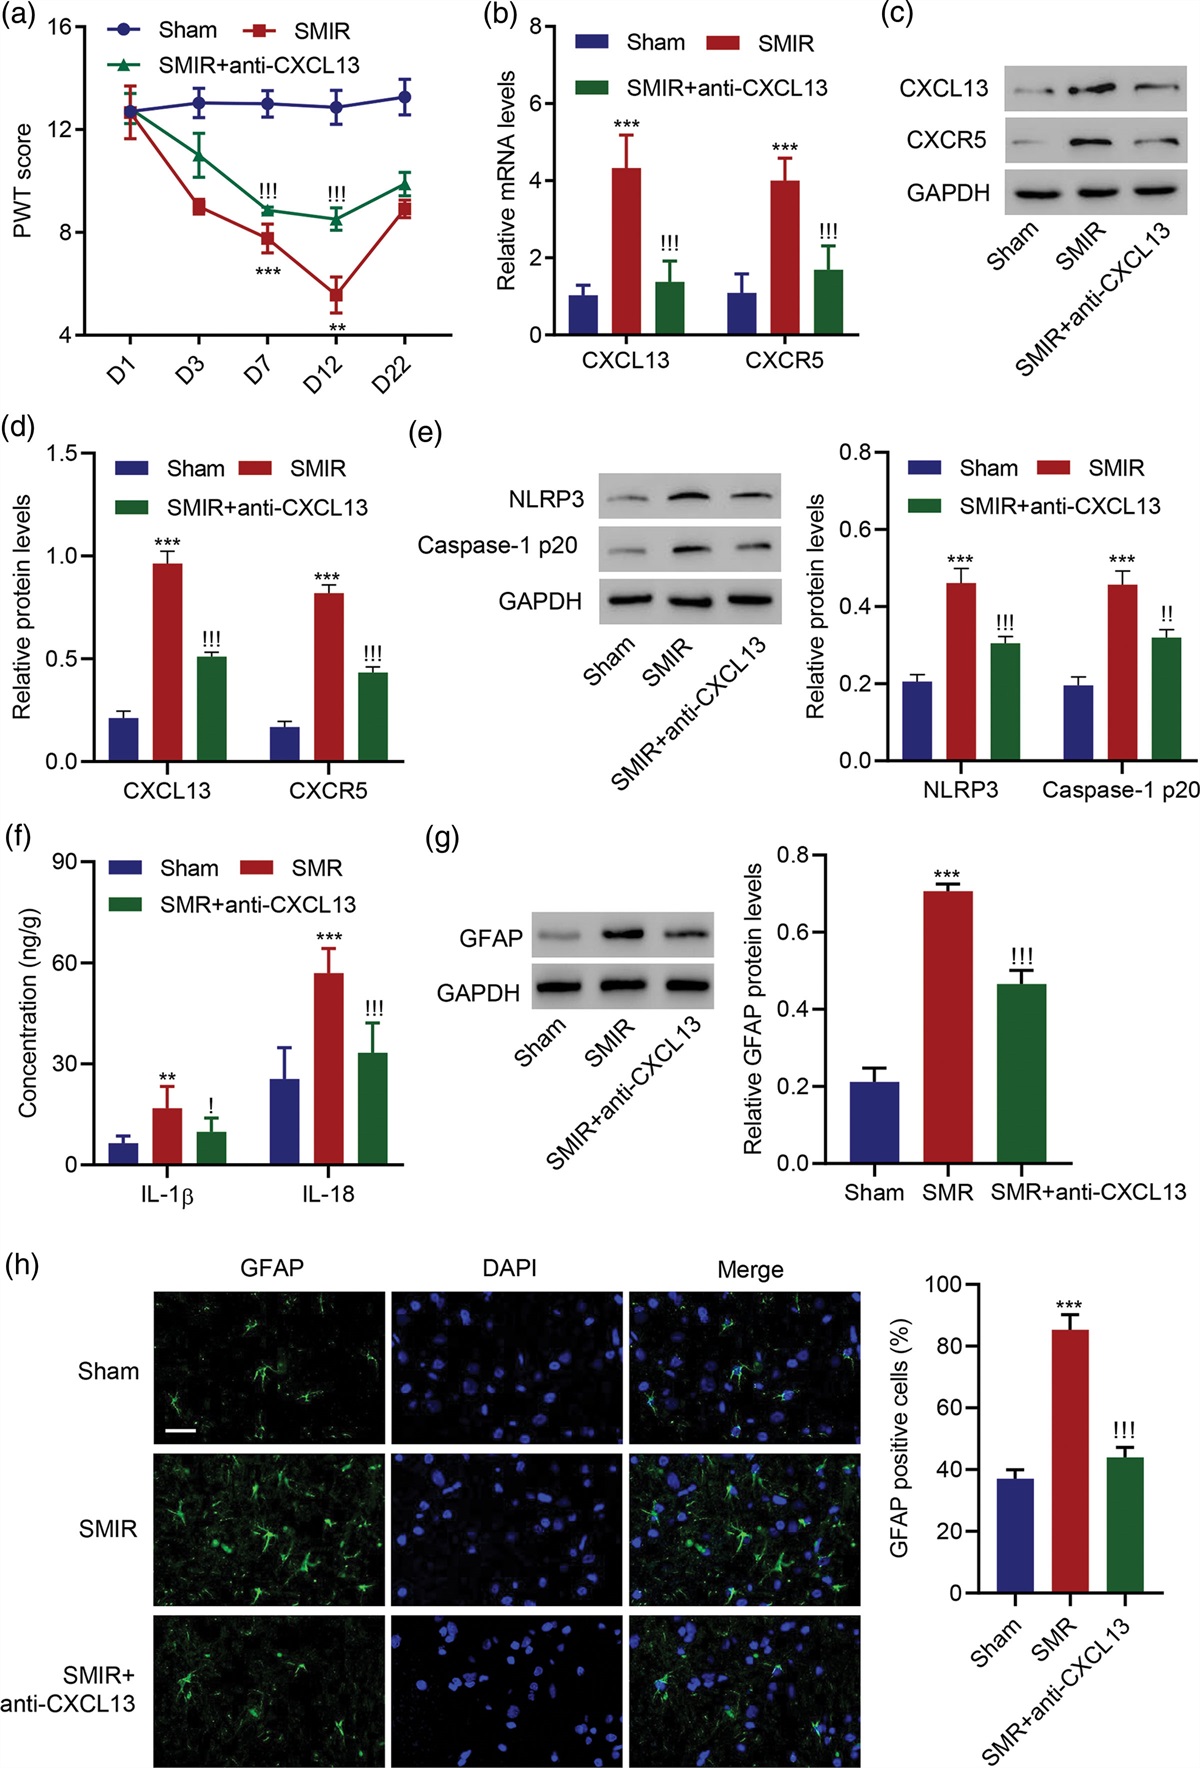 CXCL13/CXCR5 promote chronic postsurgical pain and astrocyte activation in rats by targeting NLRP3